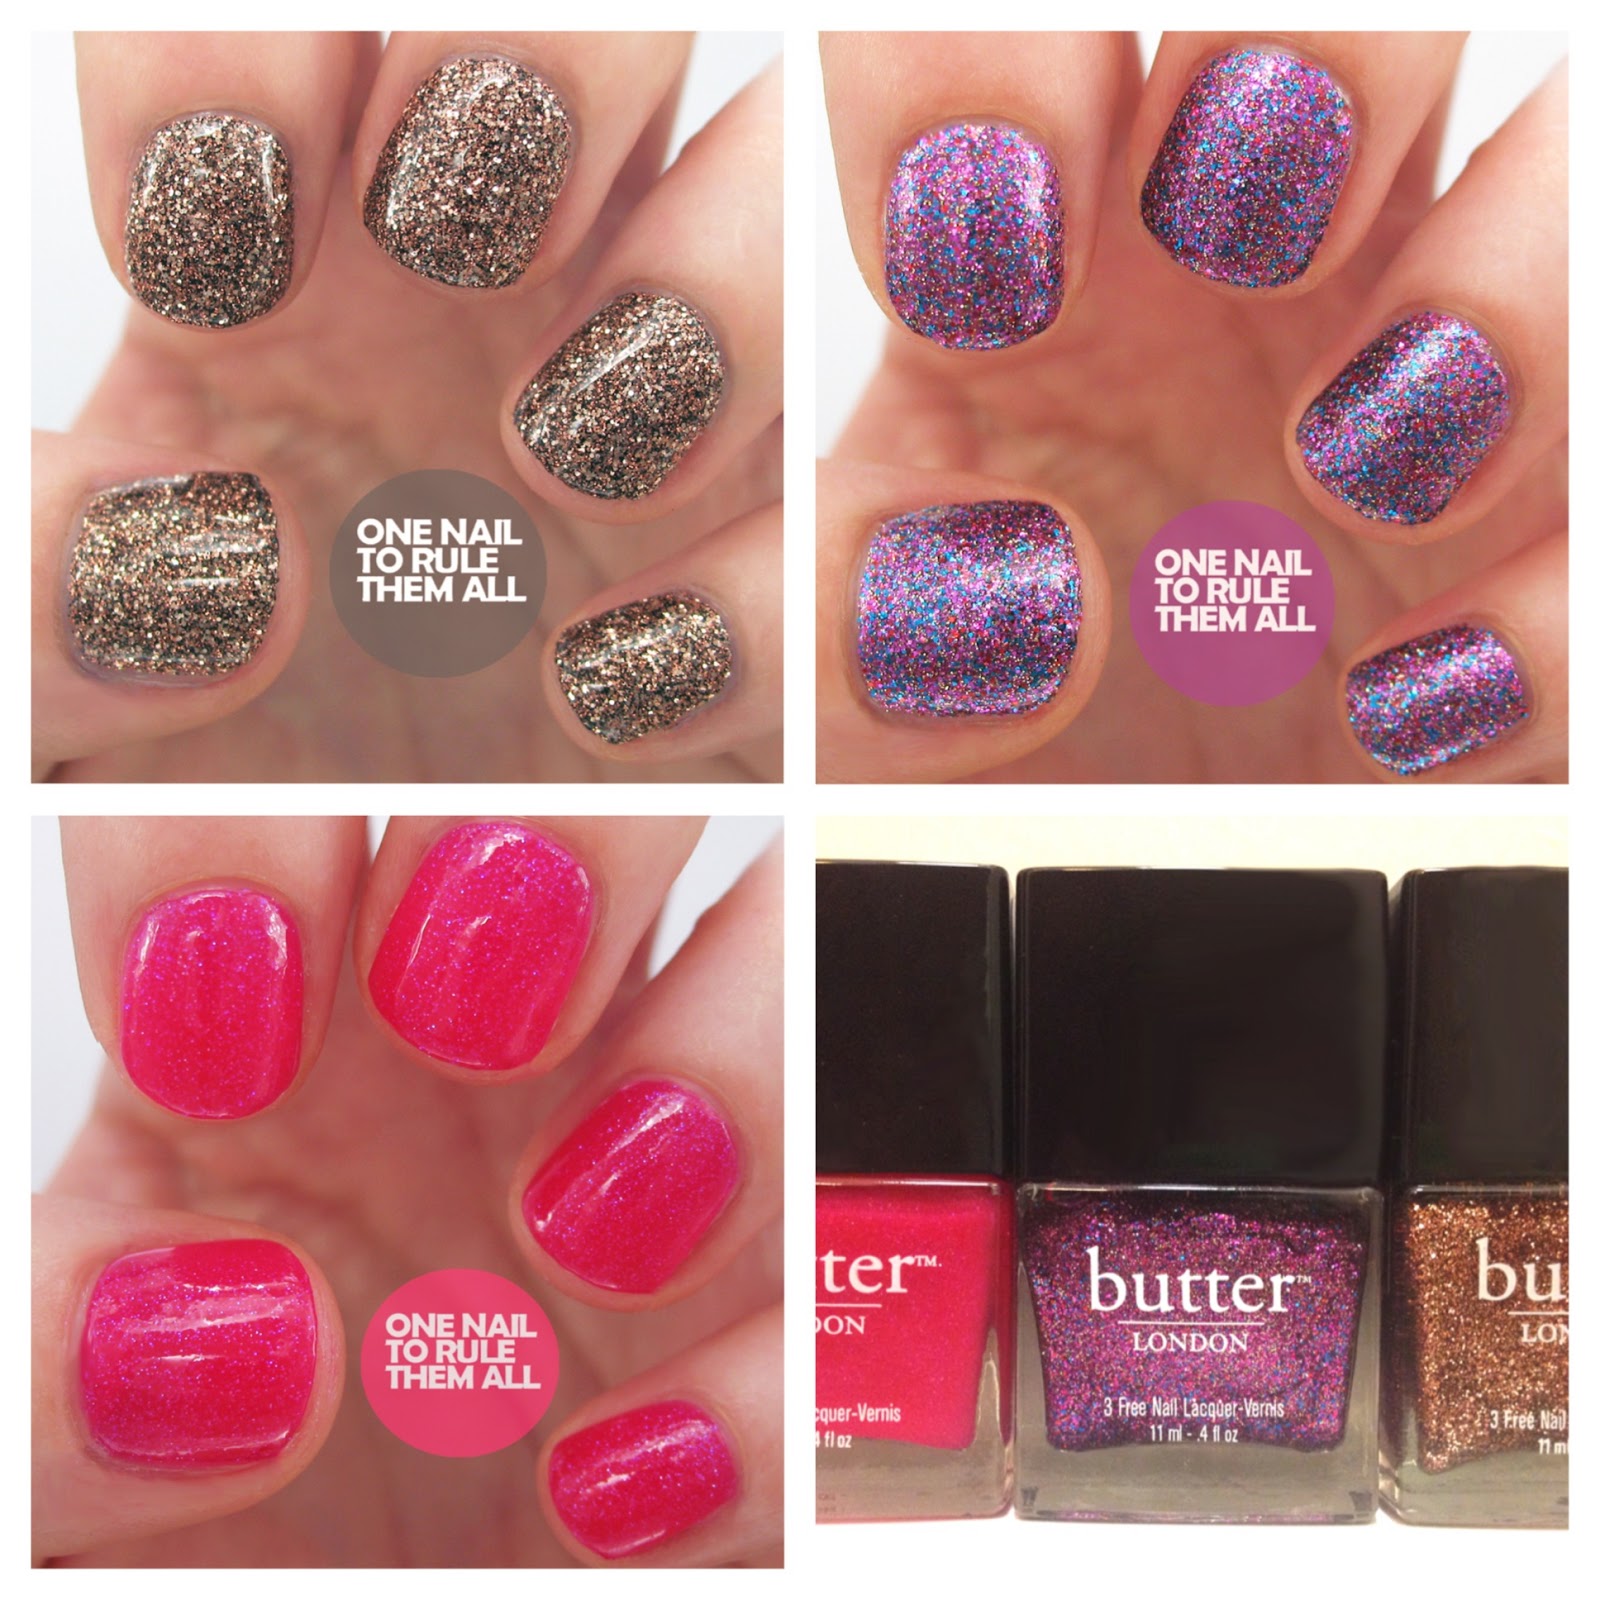 One Nail To Rule Them All: Butter LONDON Glitter Swatches